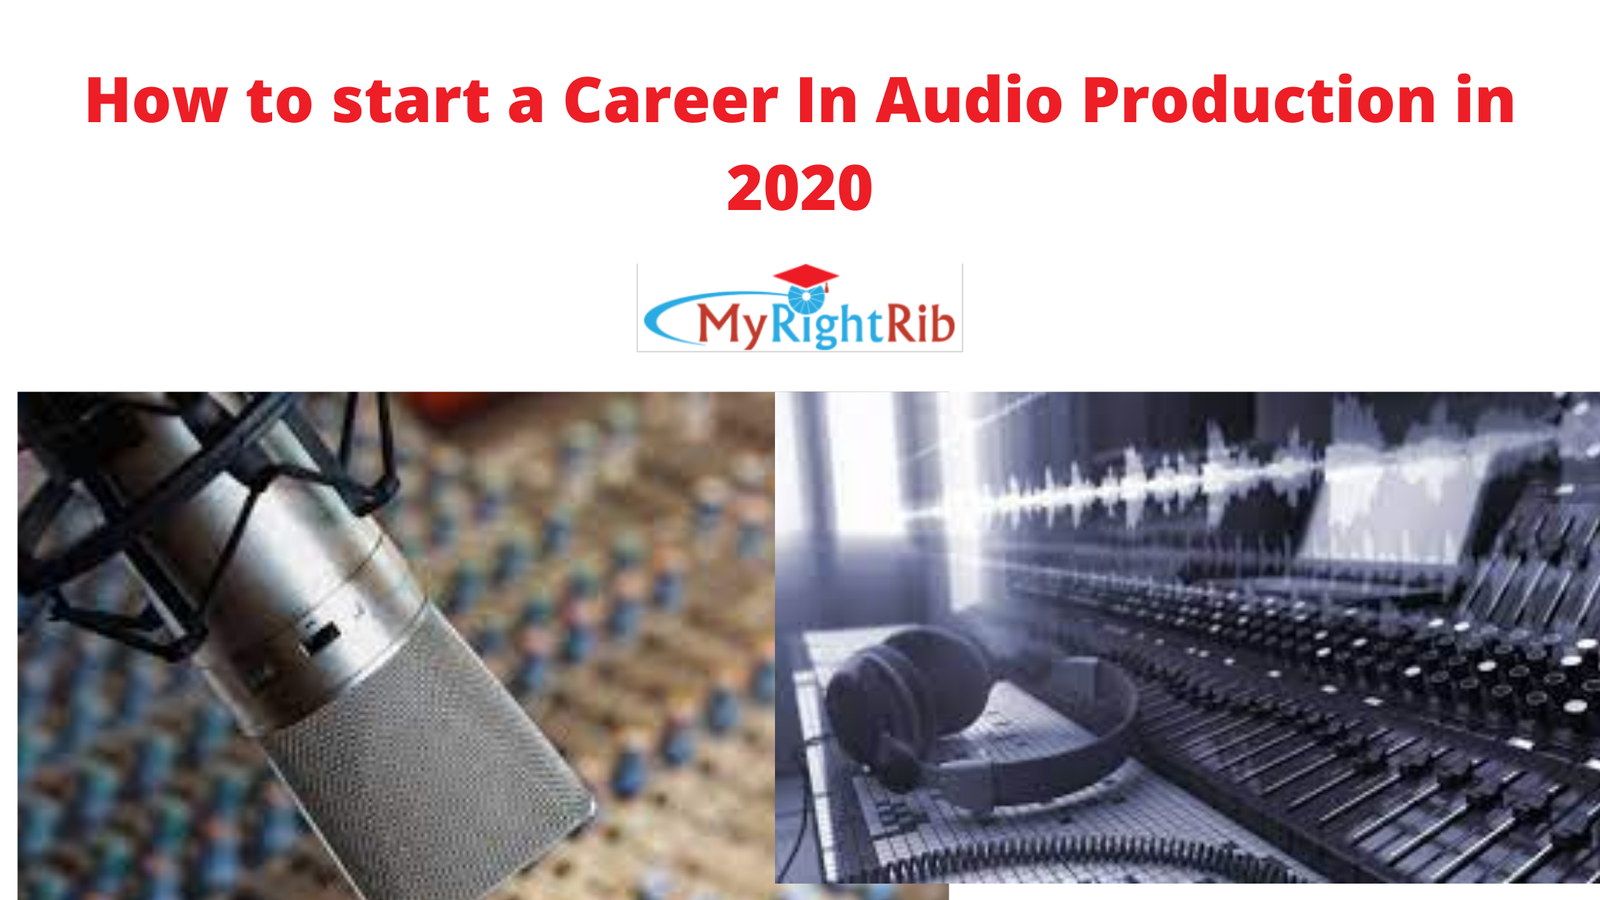 How To Start a Career in Audio Production